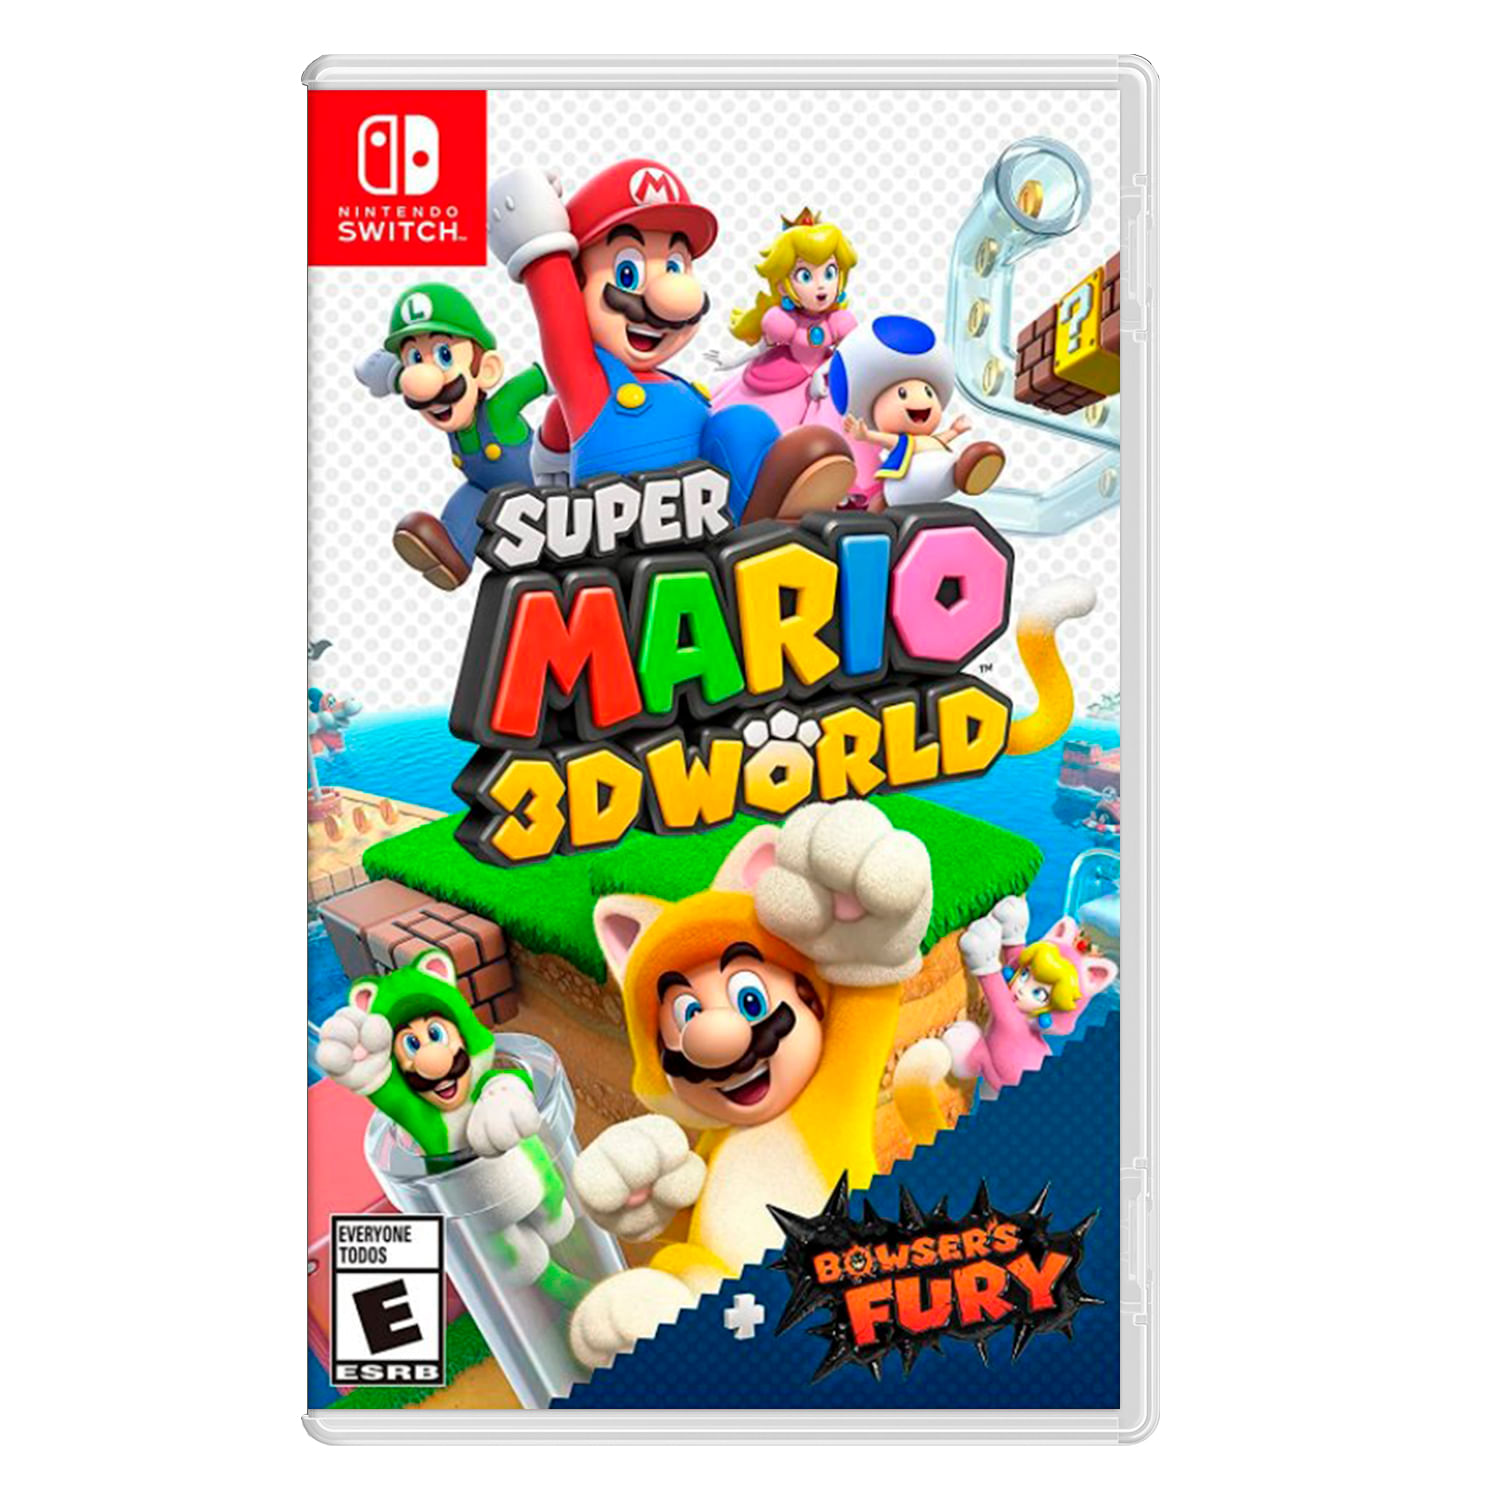 Juego Nintendo Switch Super Mario 3D World + Bowsers Fury